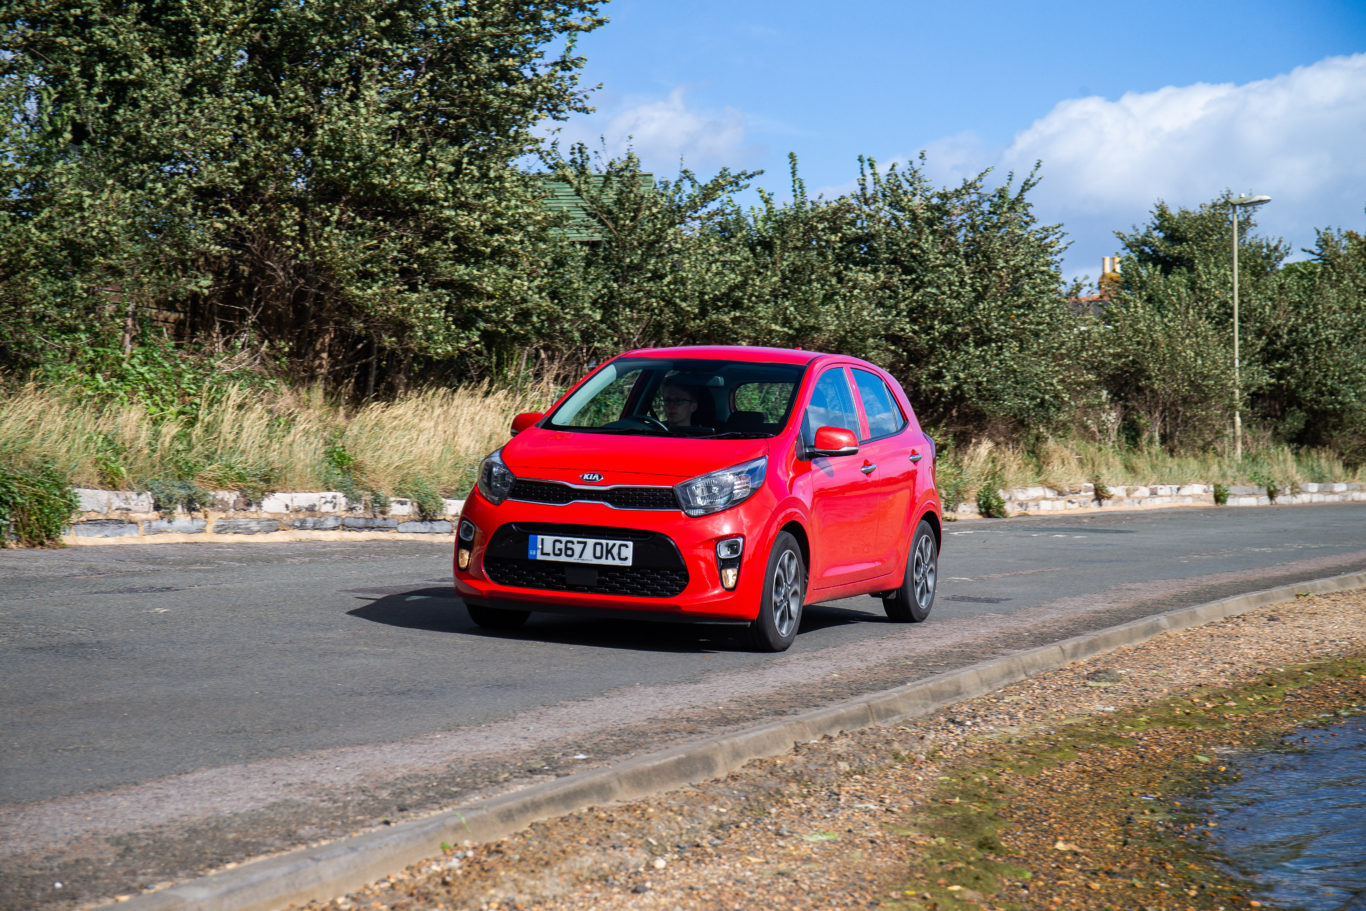 The Picanto is an ideal choice for urban drivers